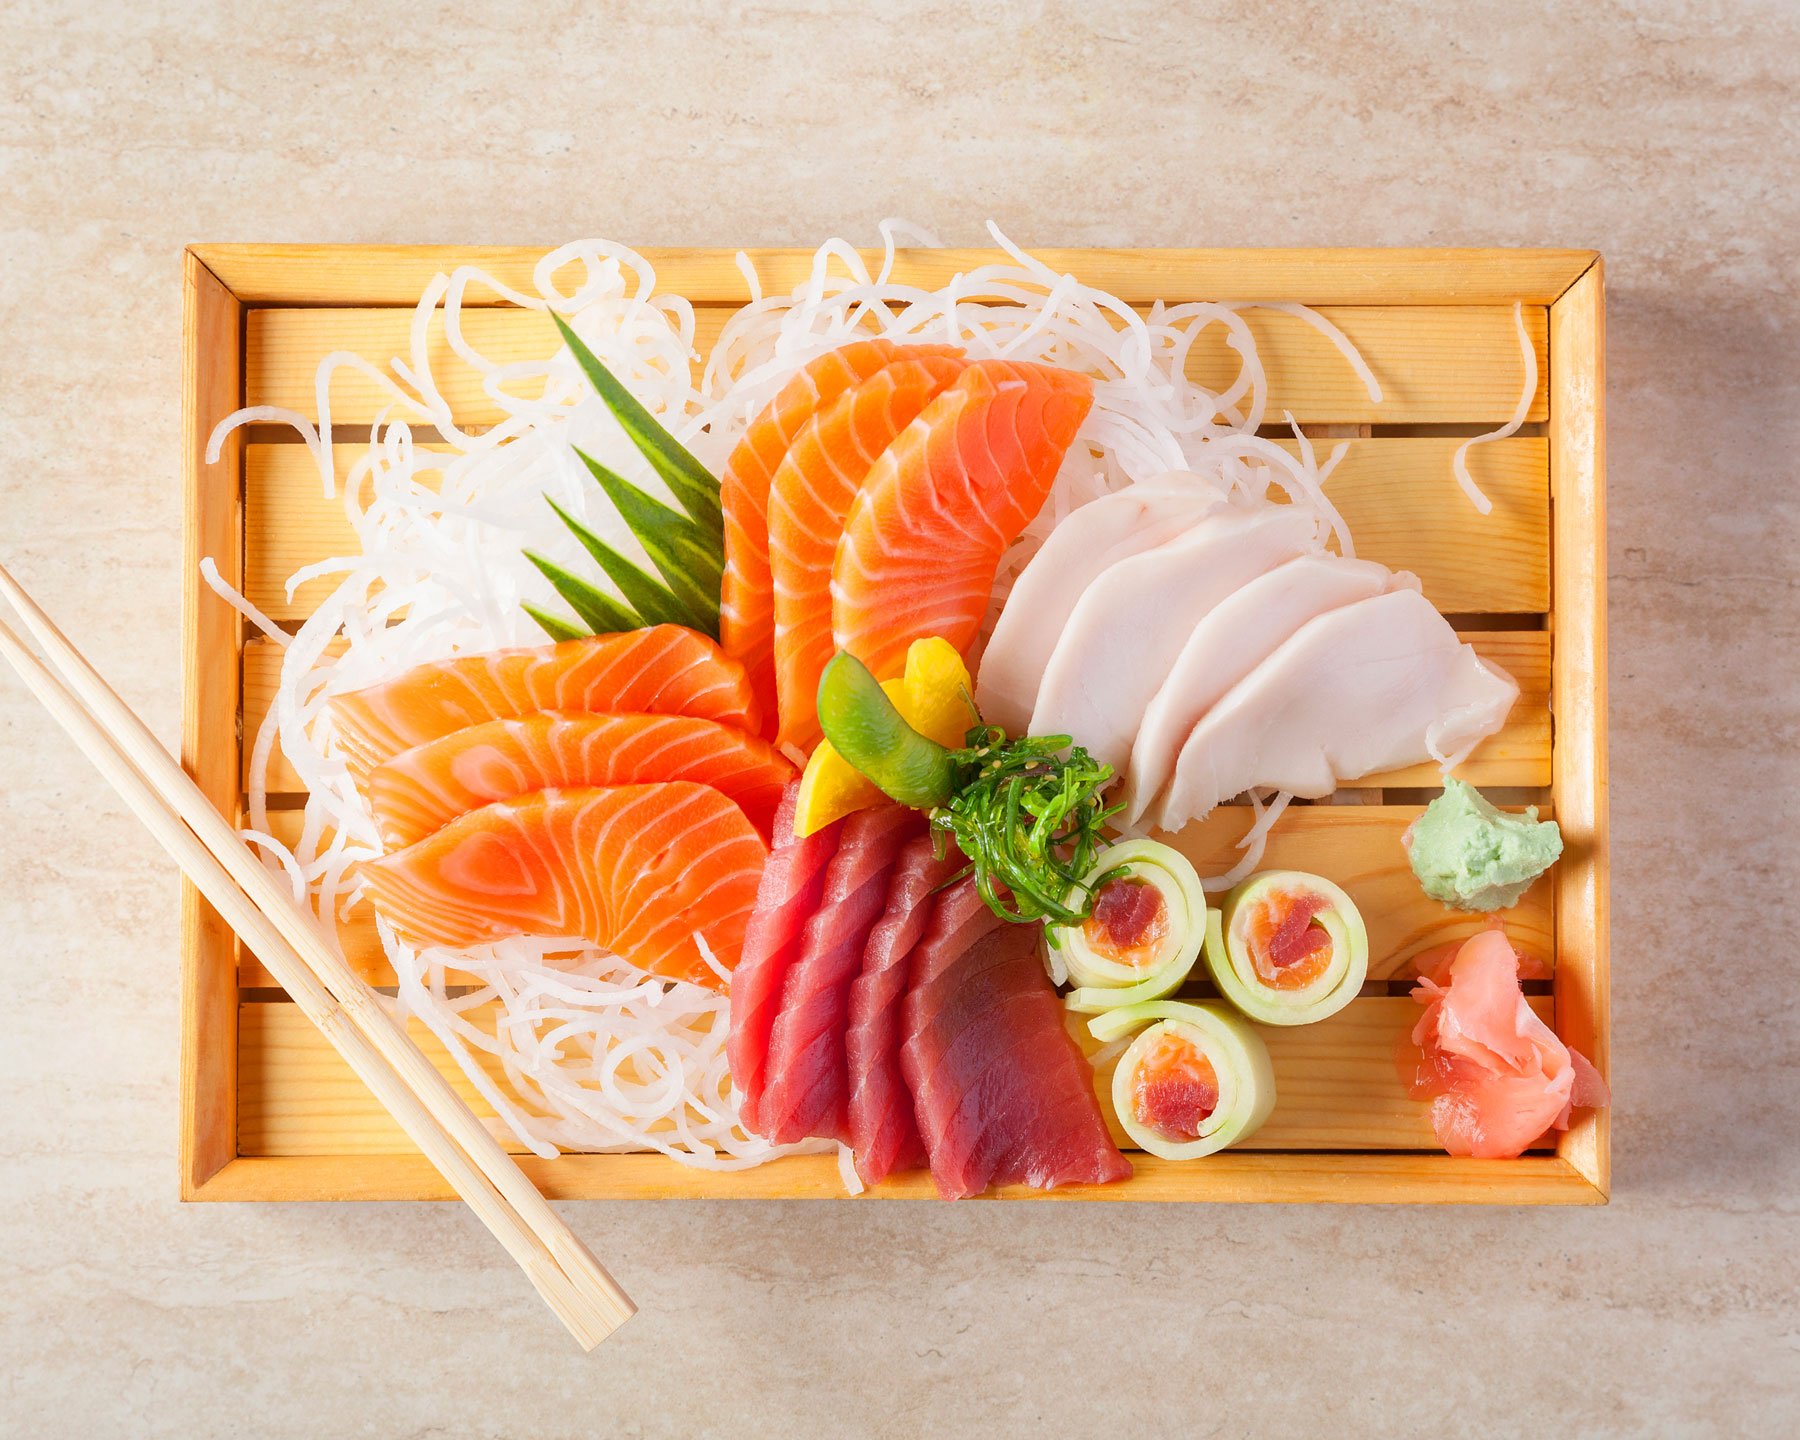 How to order sushi for better blood sugar